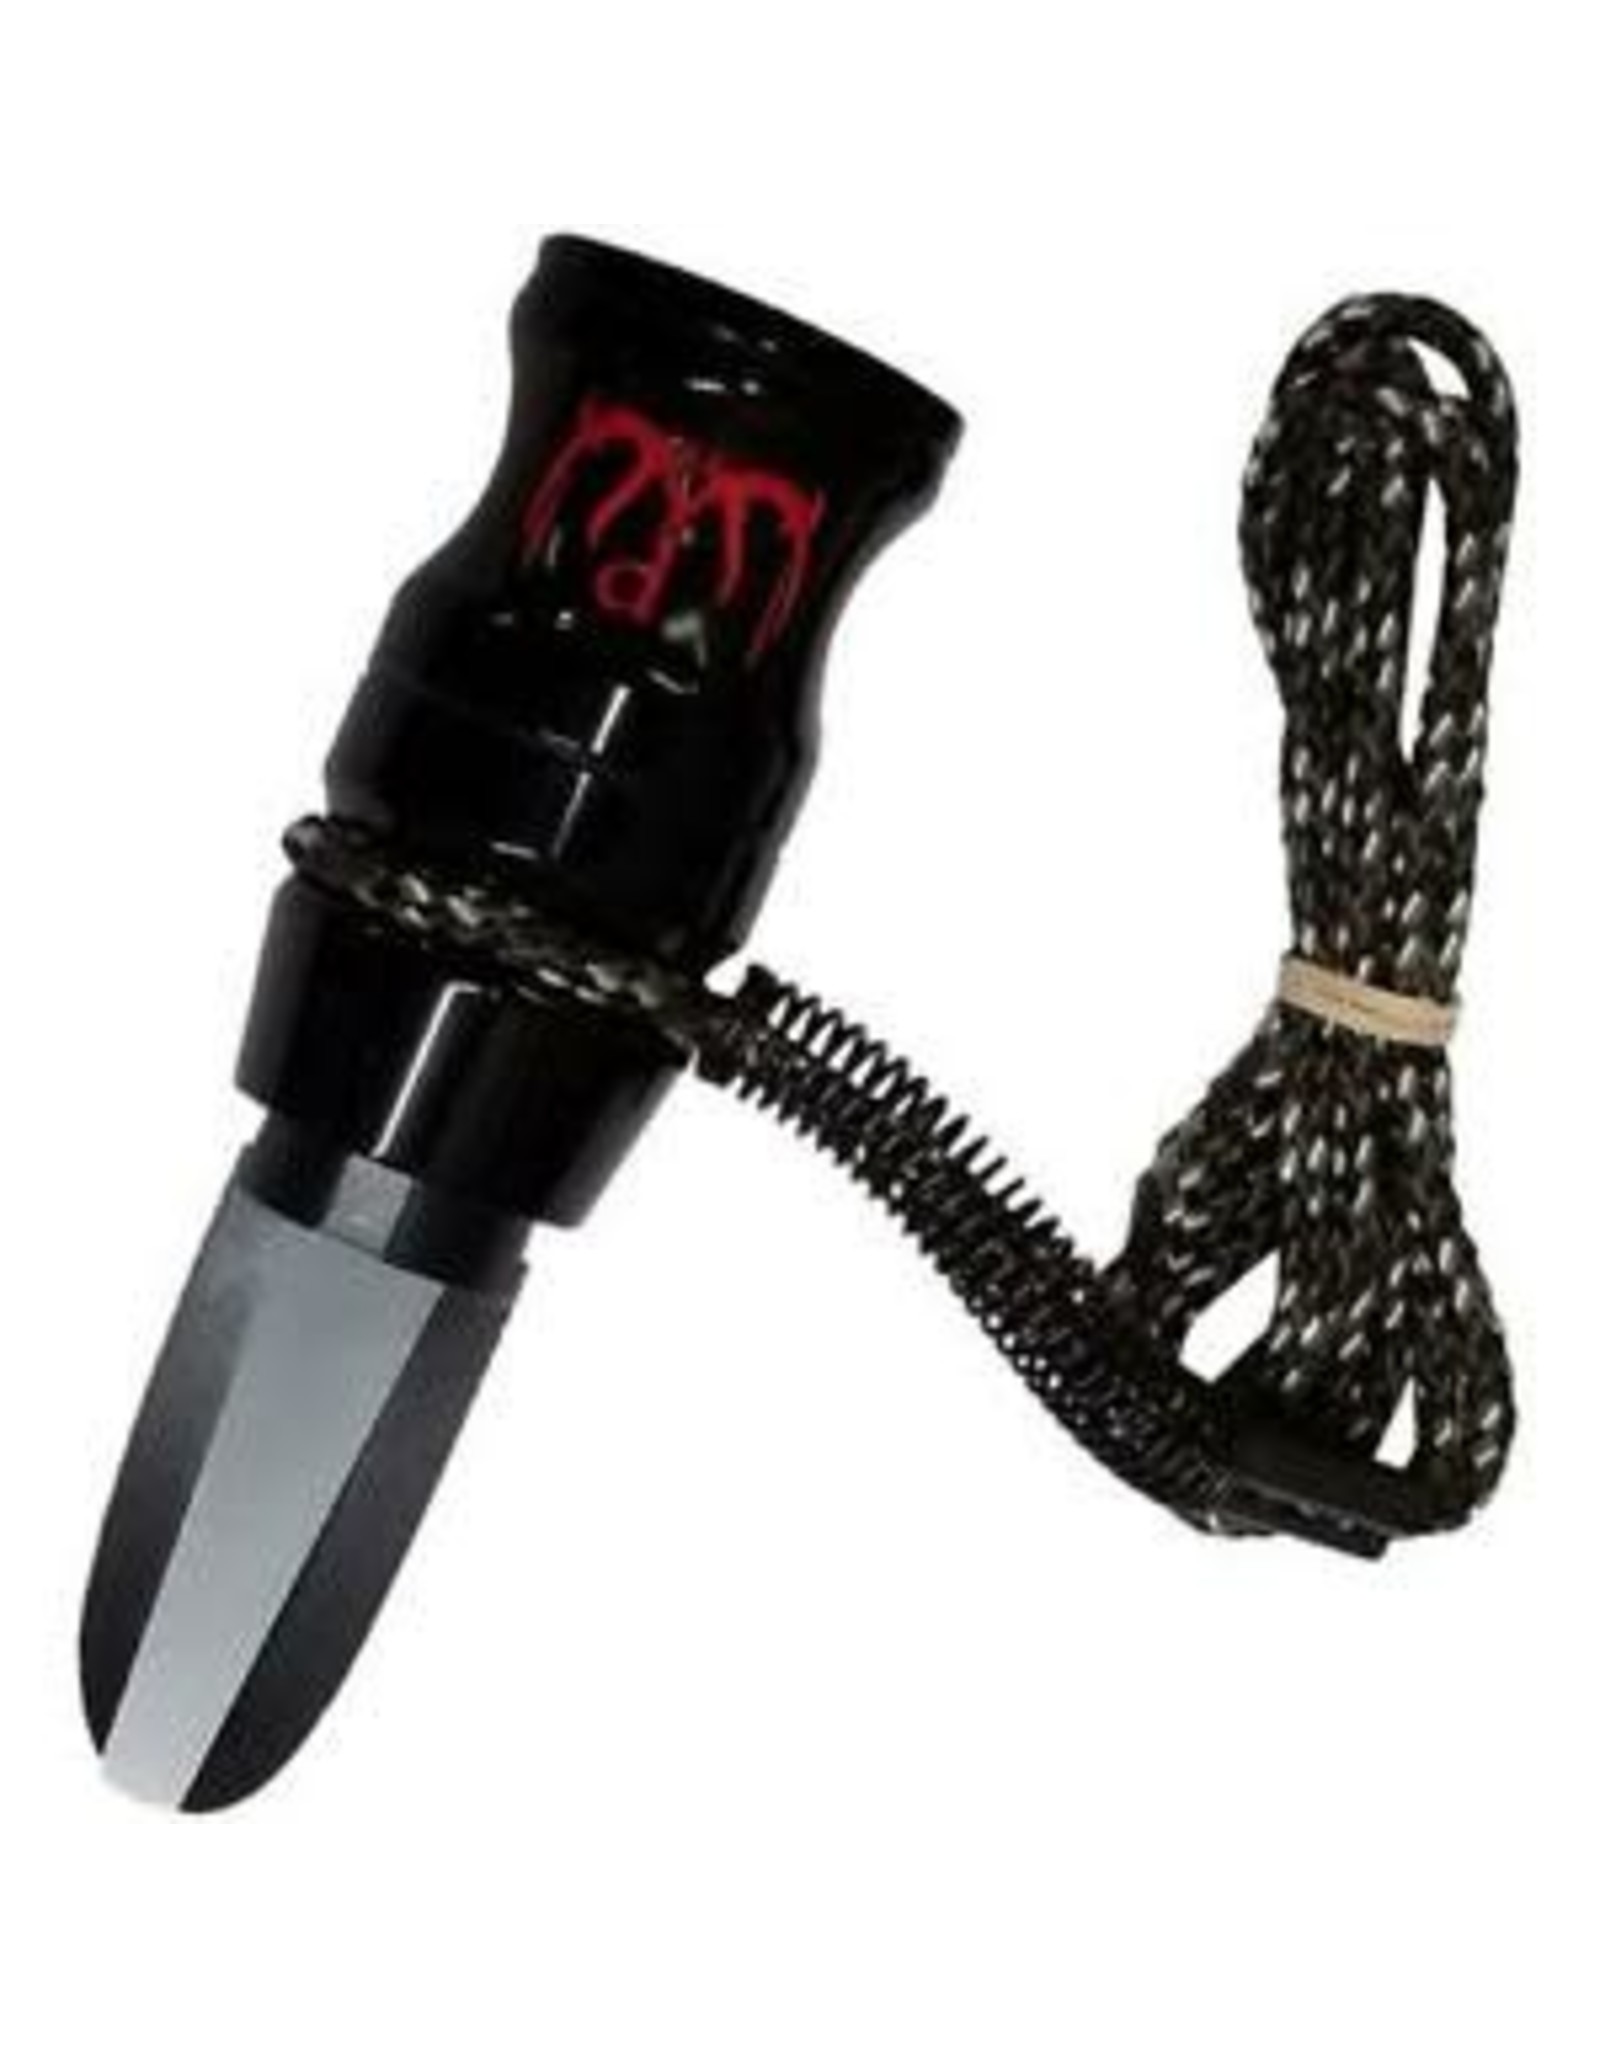 ROCKY MOUNTAIN HUNTING CALLS RMHC WILD THANG ELK CALL